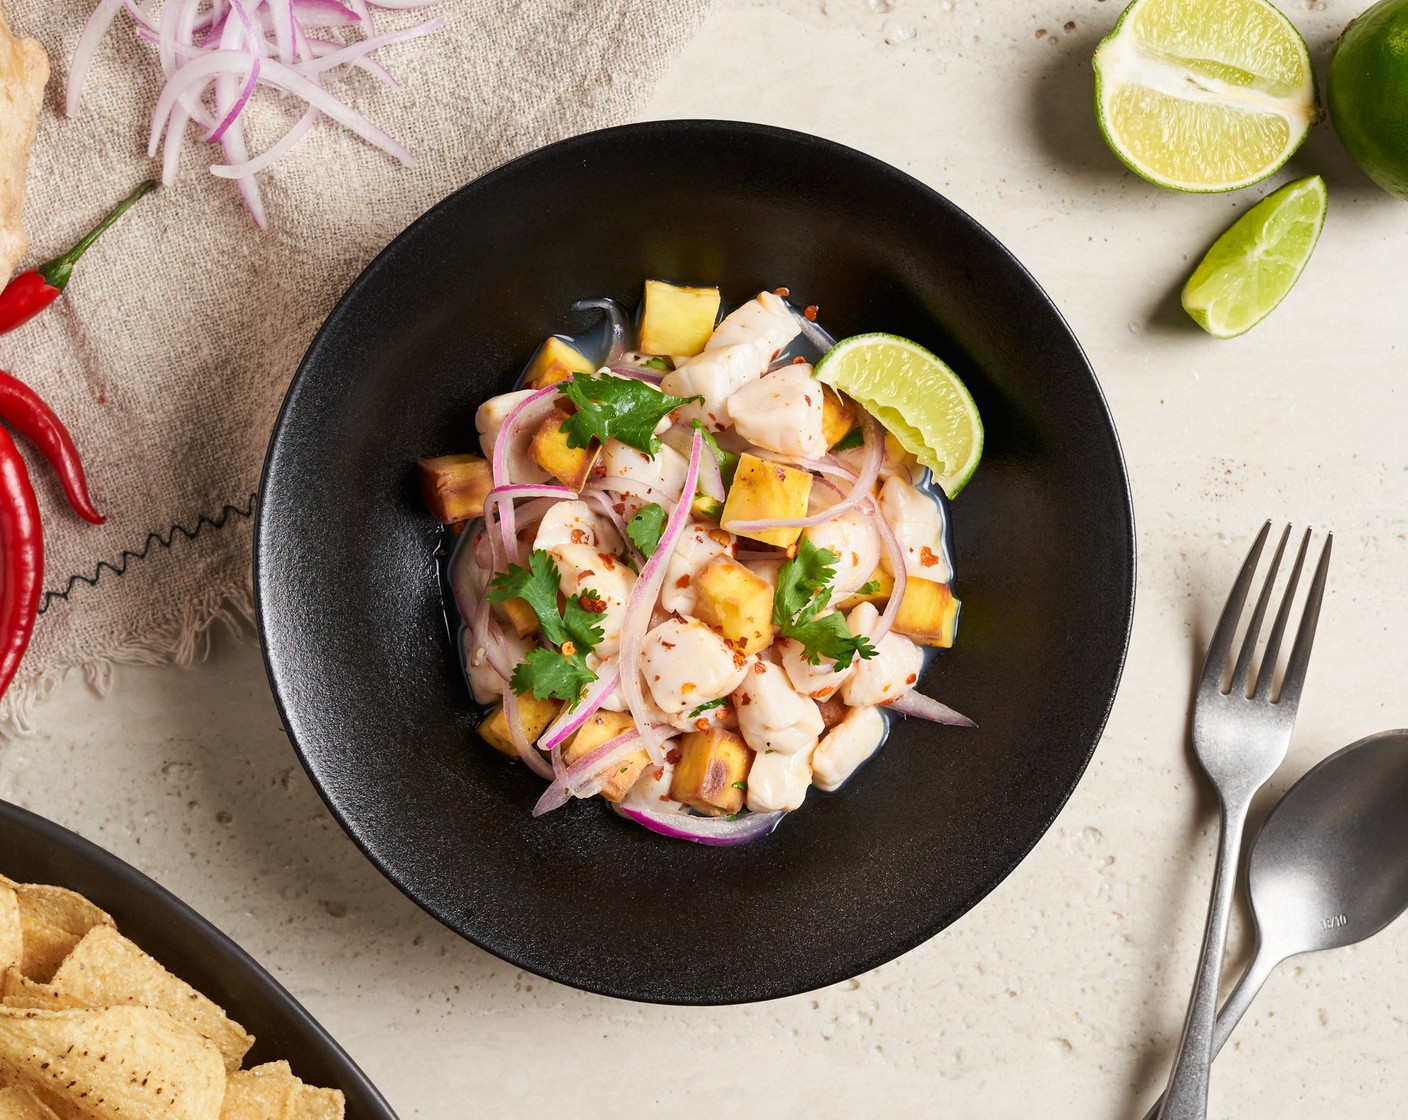 step 6 Serve the scallop ceviche in a bowl with some of the ceviche liquid, garnished with coriander leaves. Serve with Tortilla Chips (1 cup) on the side.